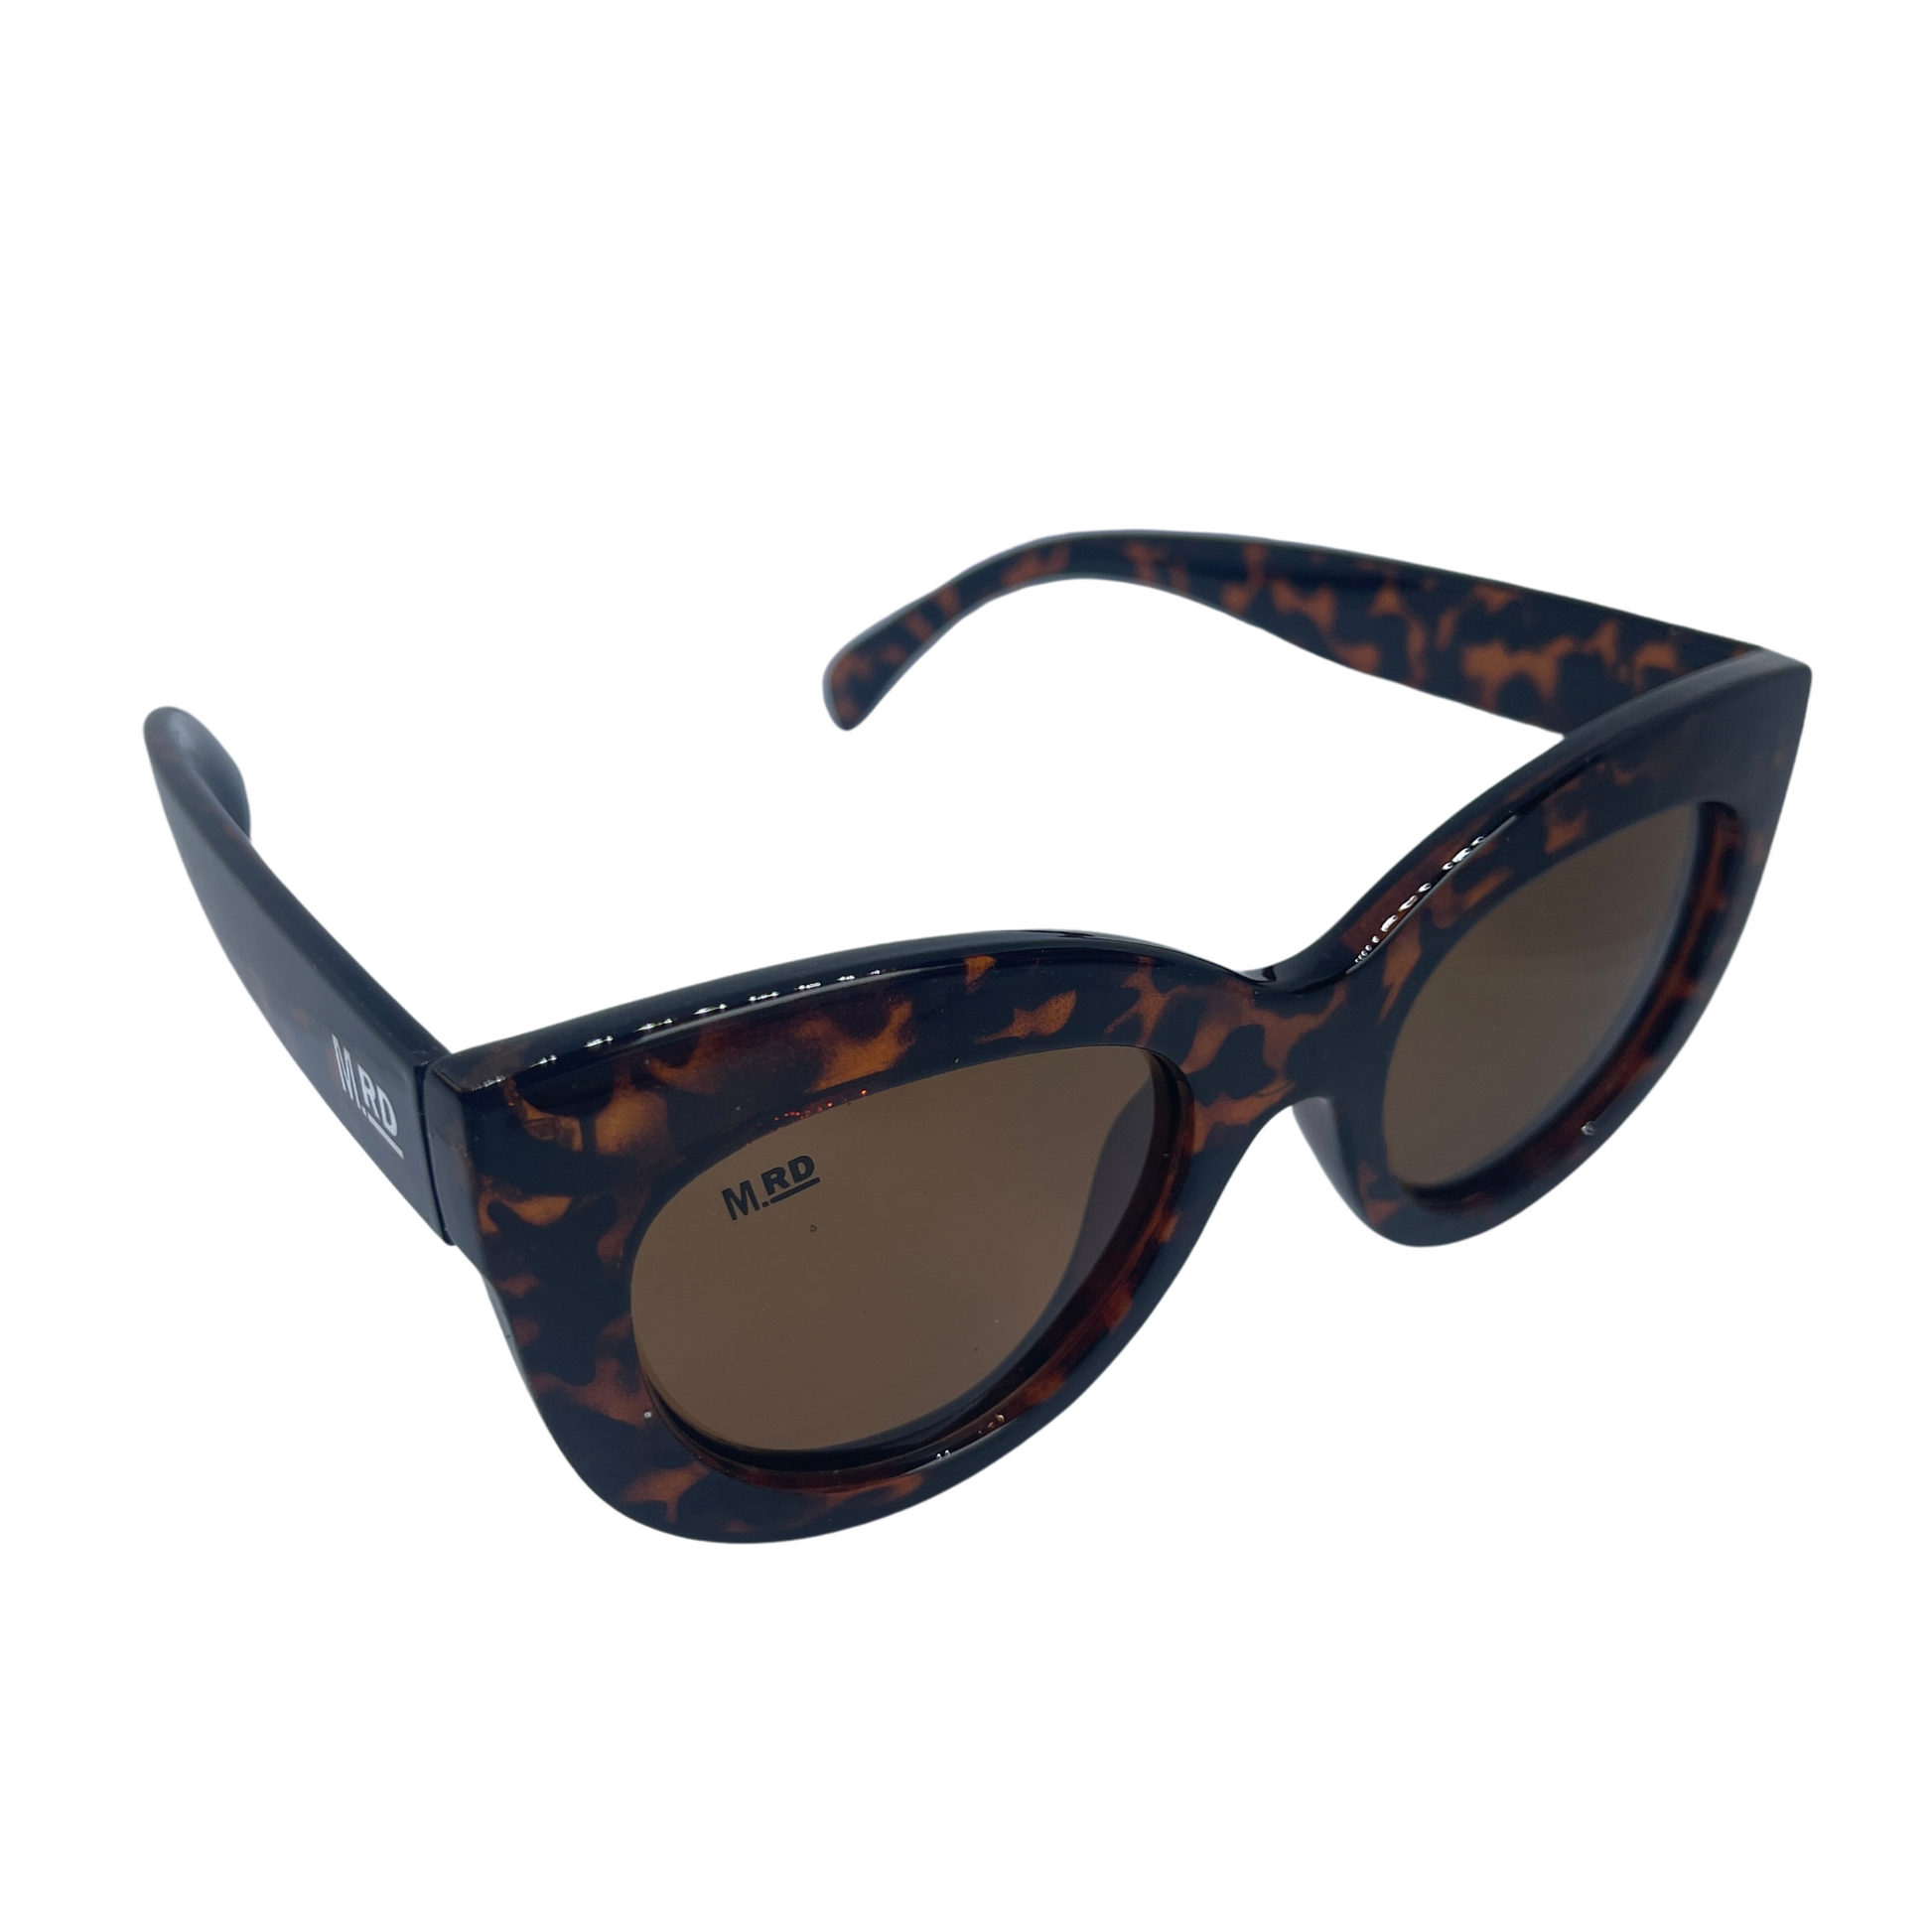 Womens sunglasses with Elizabeth Taylor style frames in tortoiseshell.